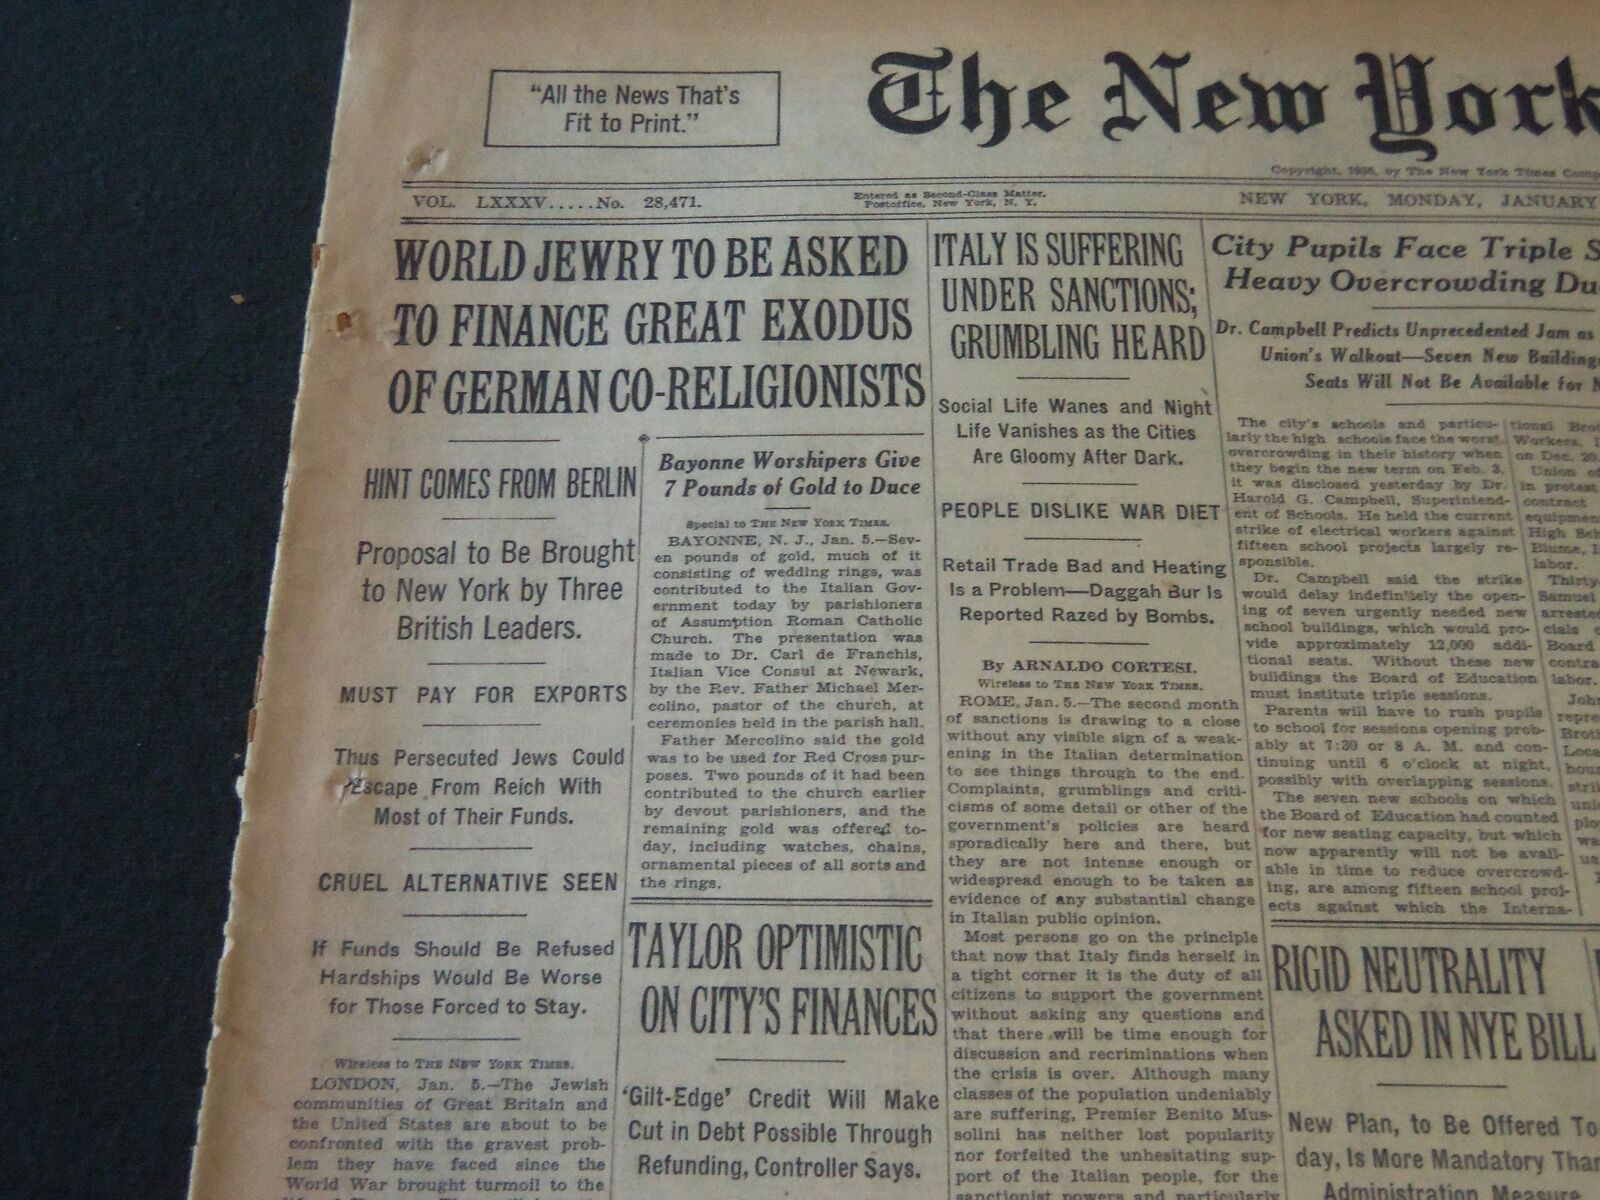 1936 JAN 6 NEW YORK TIMES - WORLD JEWRY ASKED TO FINANCE GREAT EXODUS - NT 6712